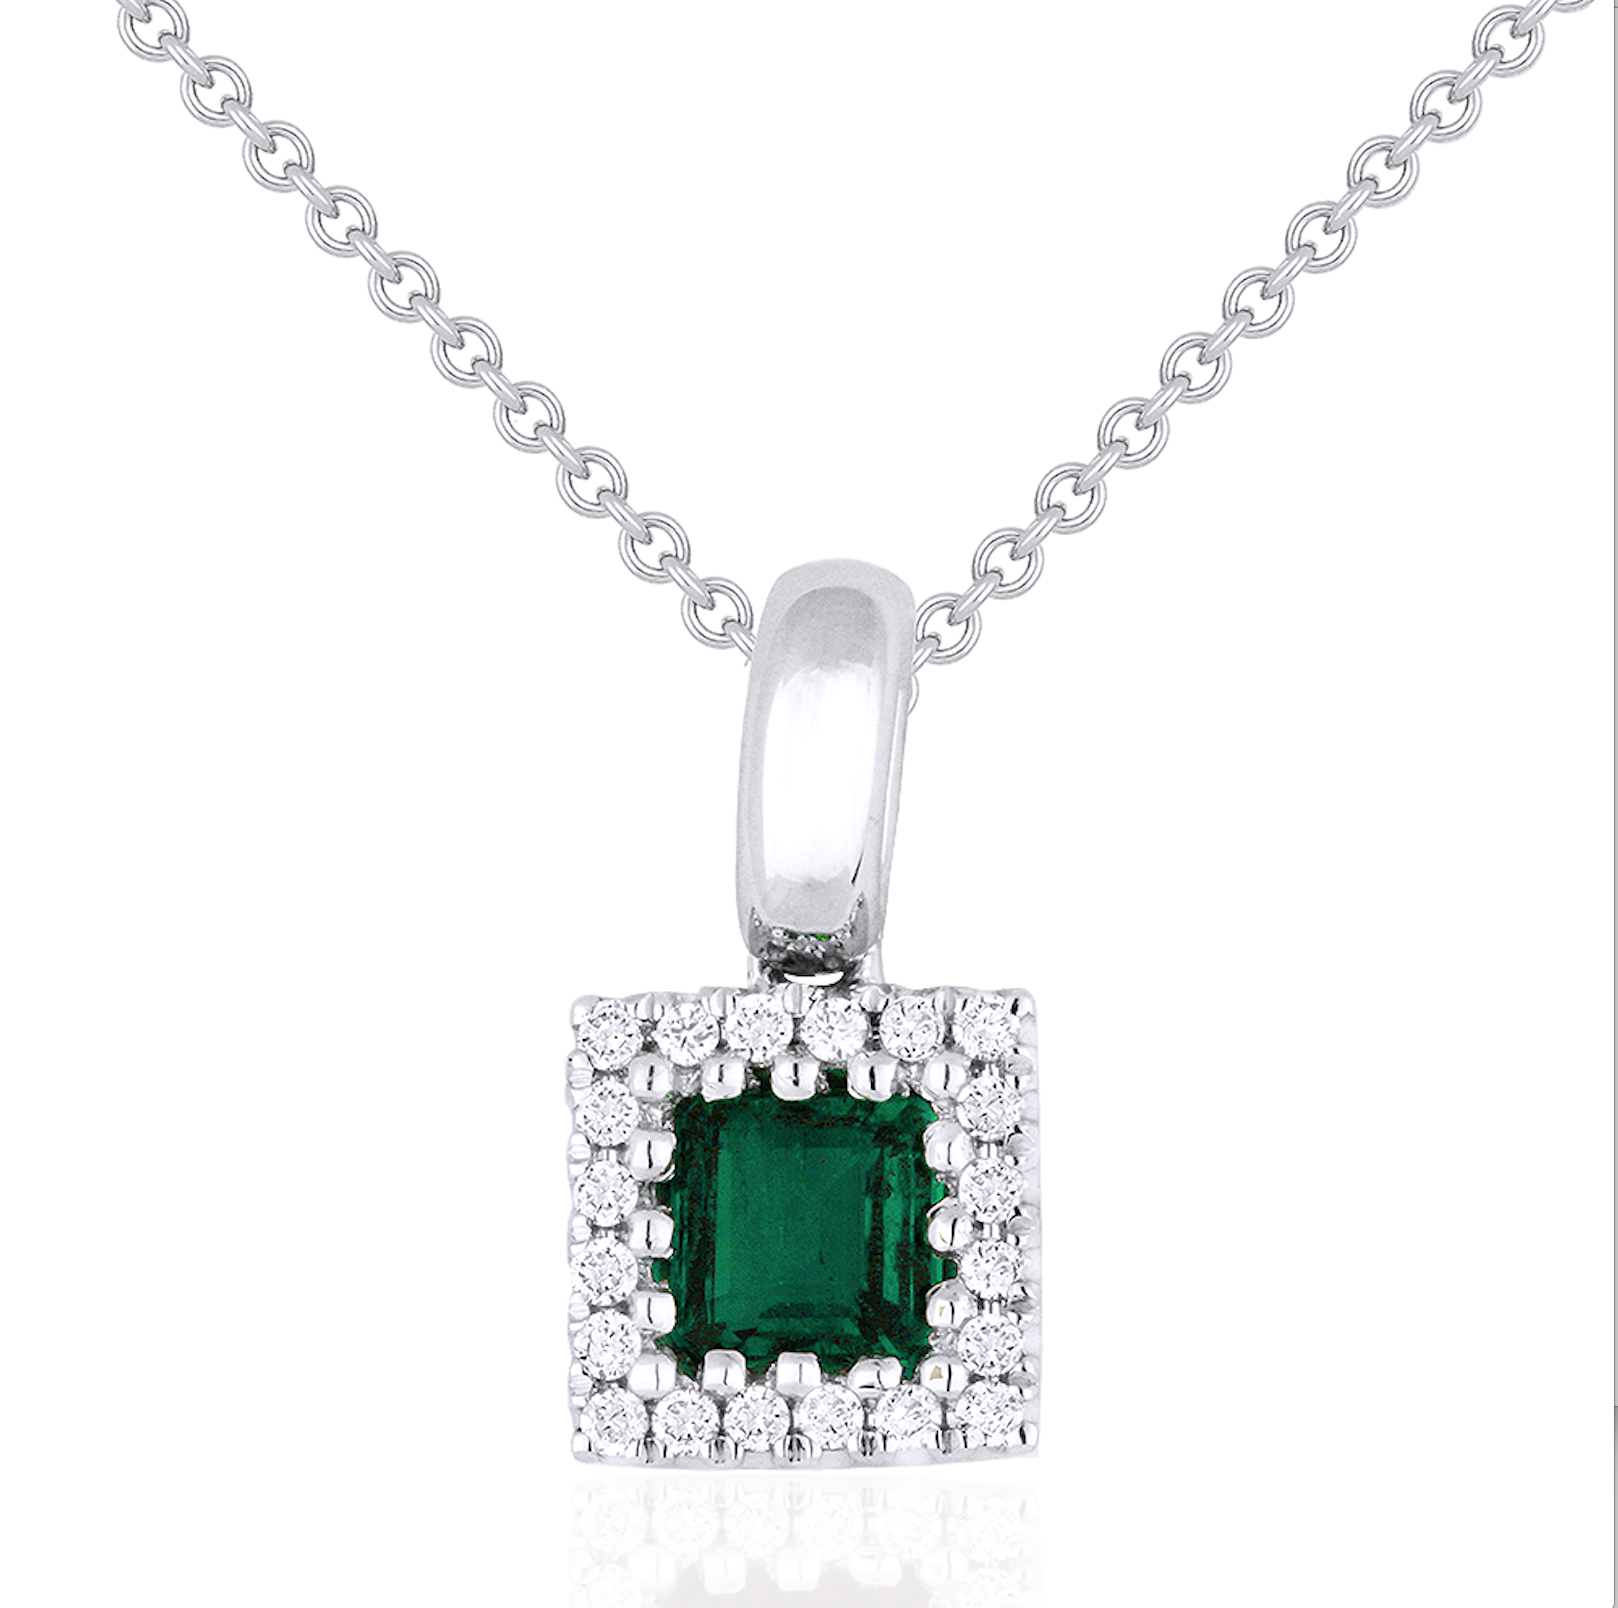 Lady's White 14 Karat Pendant/Chain With 20=0.08Tw Round Diamonds And One 0.90Ct Square Cushion Emerald